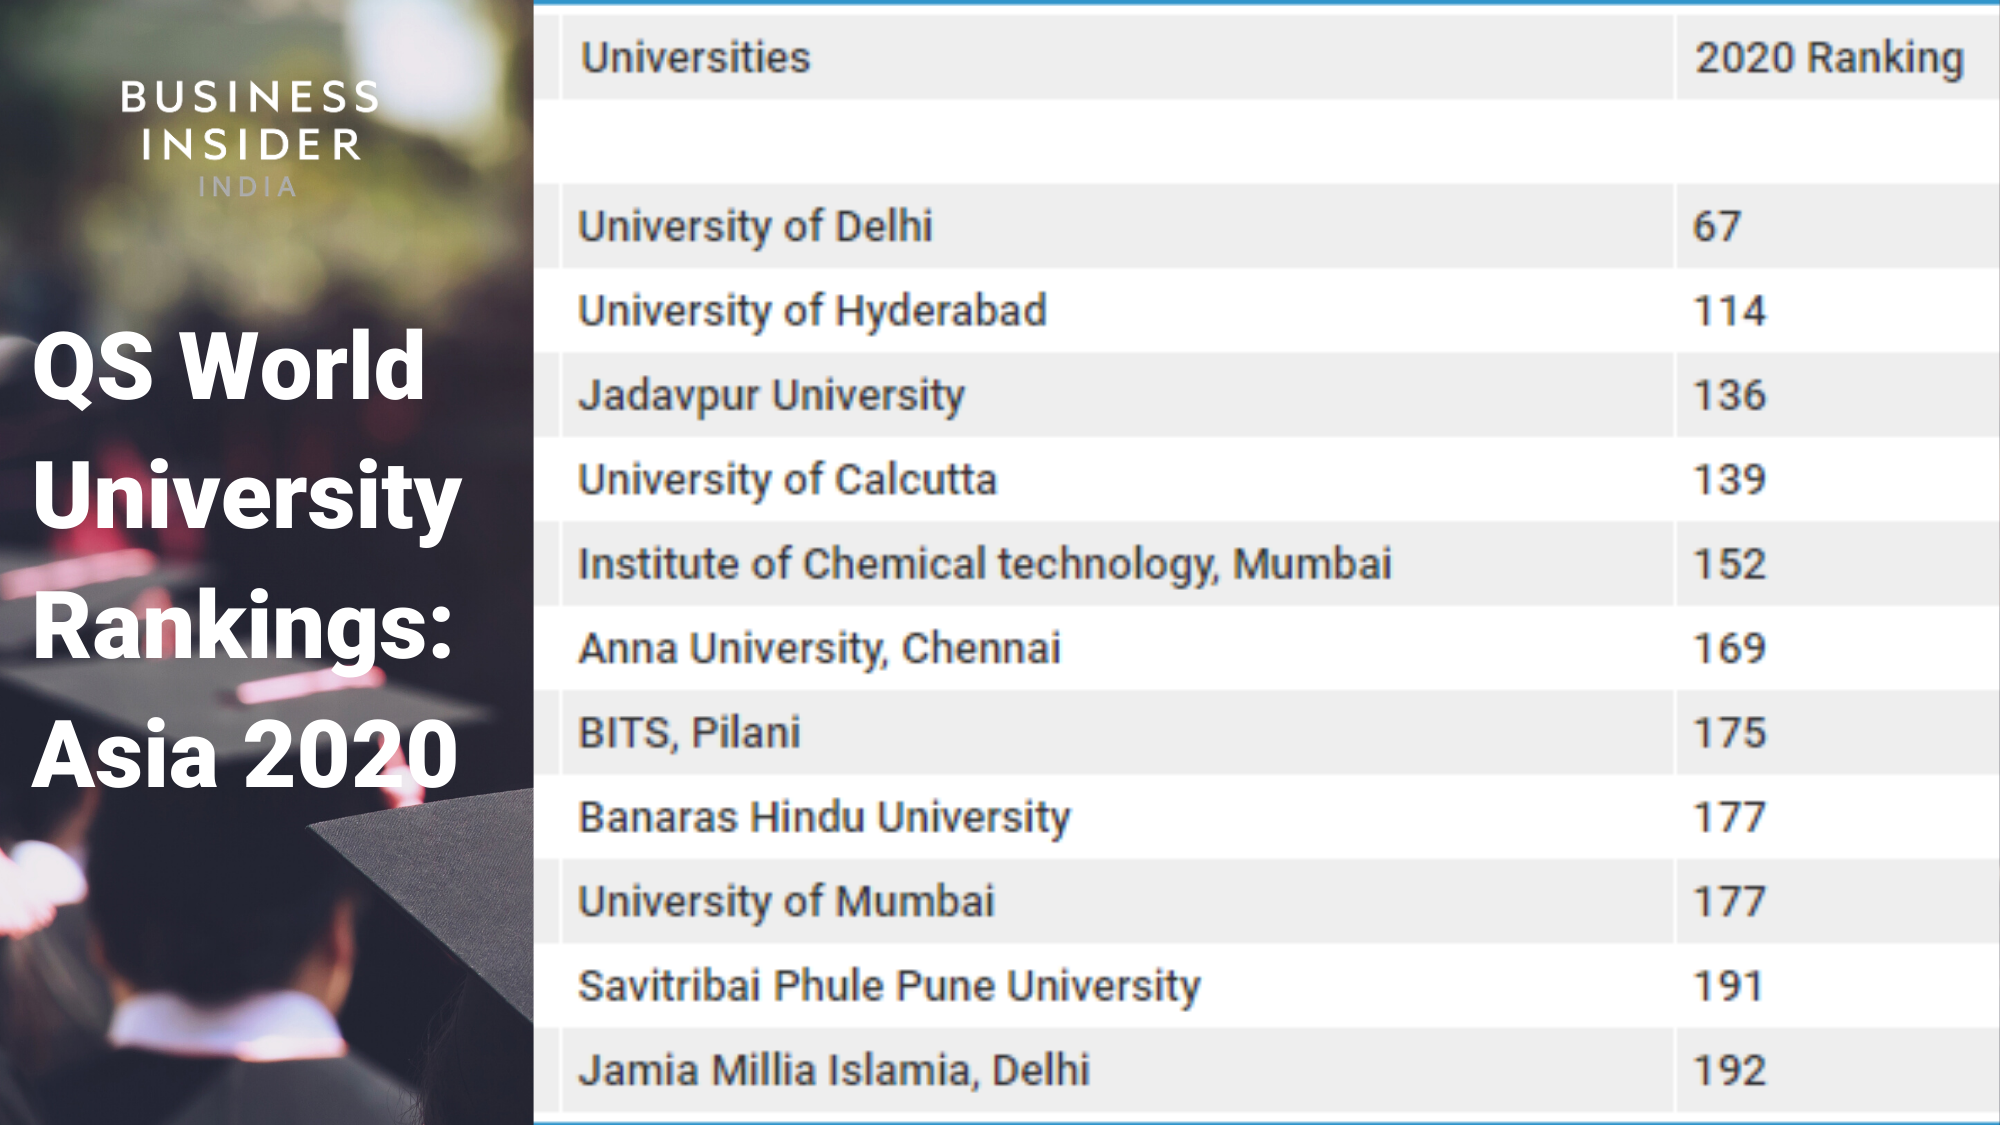 Nearly 20 Indian universities were ranked in the top 200 in the QS